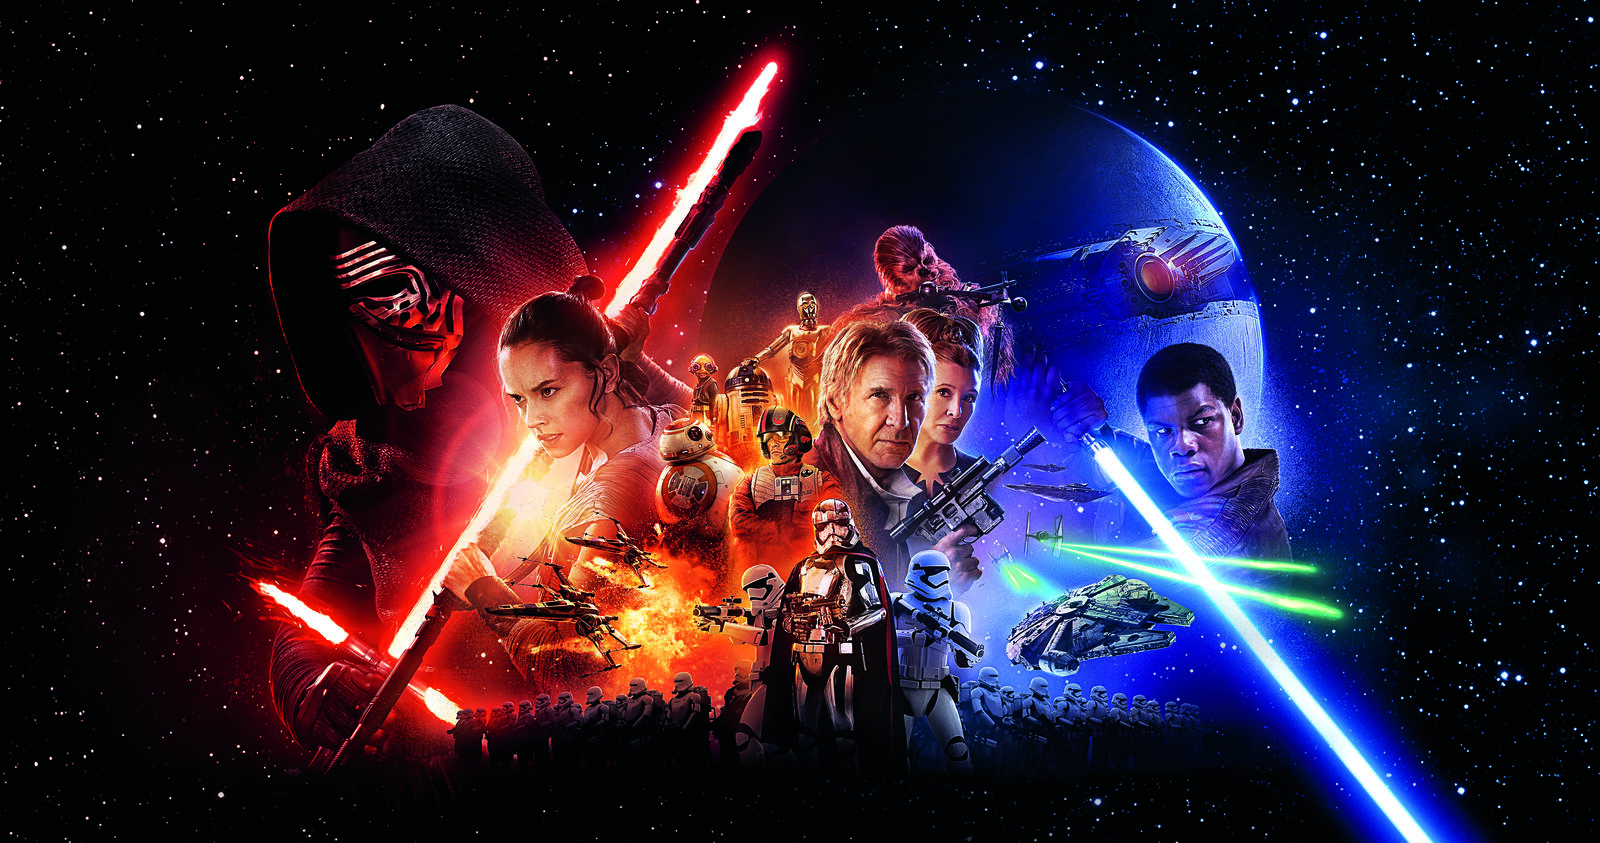 Wallpapers Star wars: the force awakens 2015 movie fantasy on the desktop